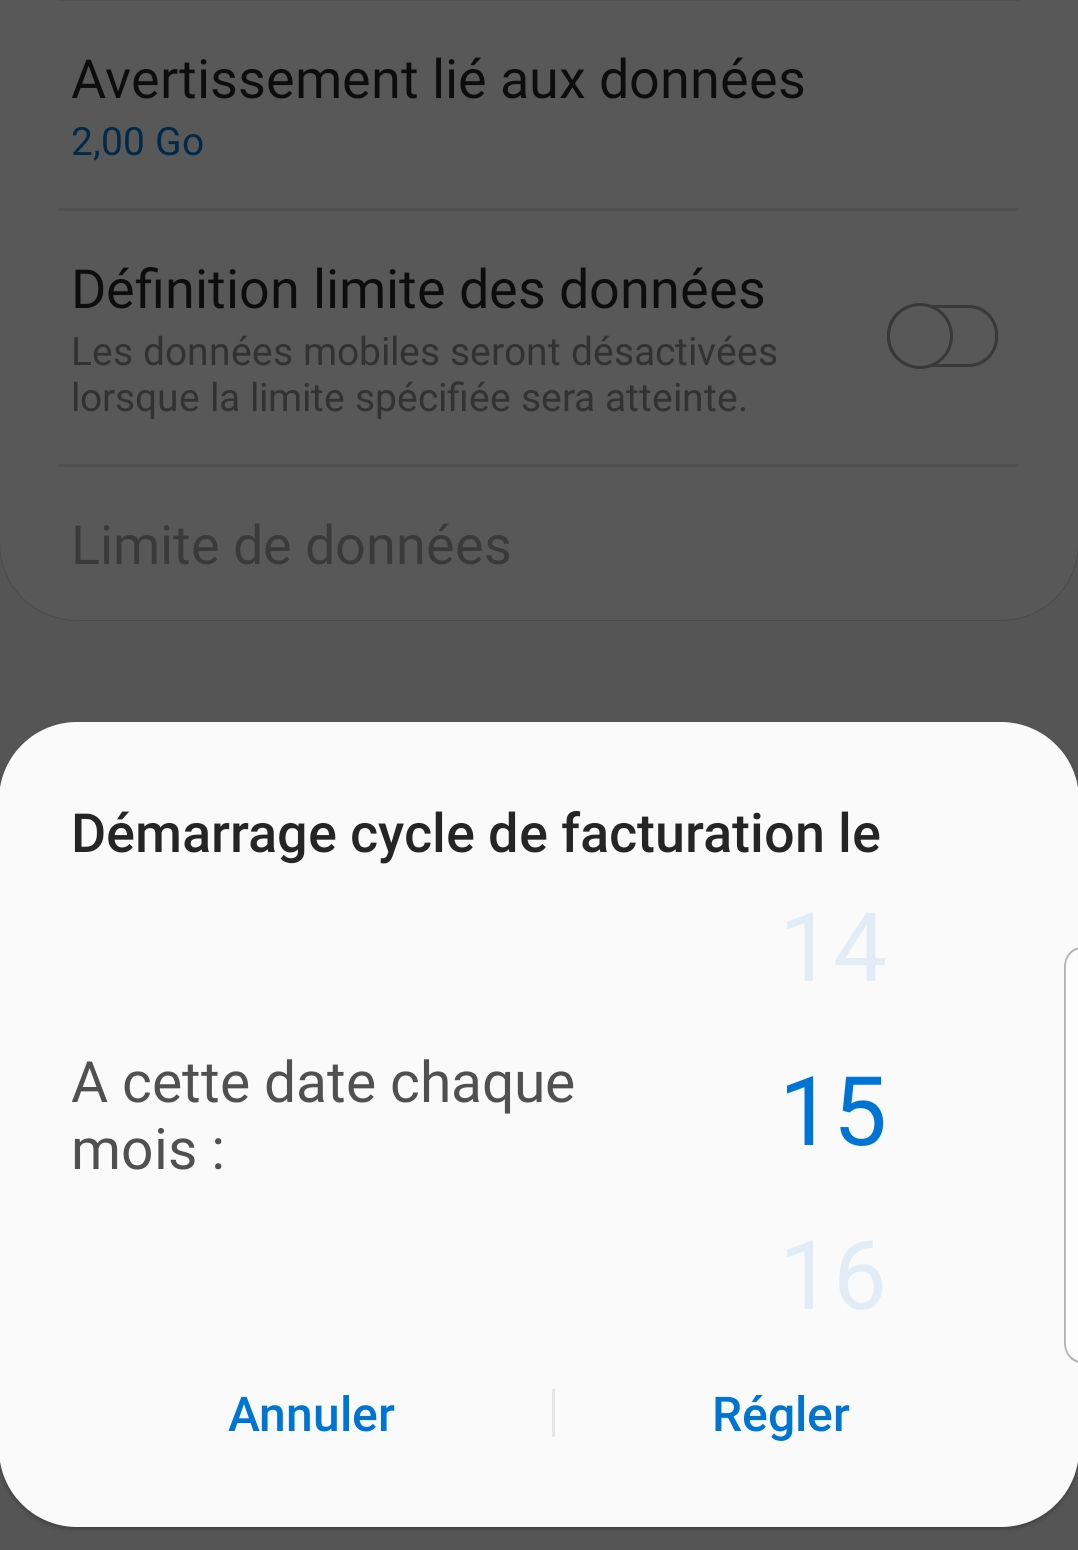 Invoice_cycle2_FR